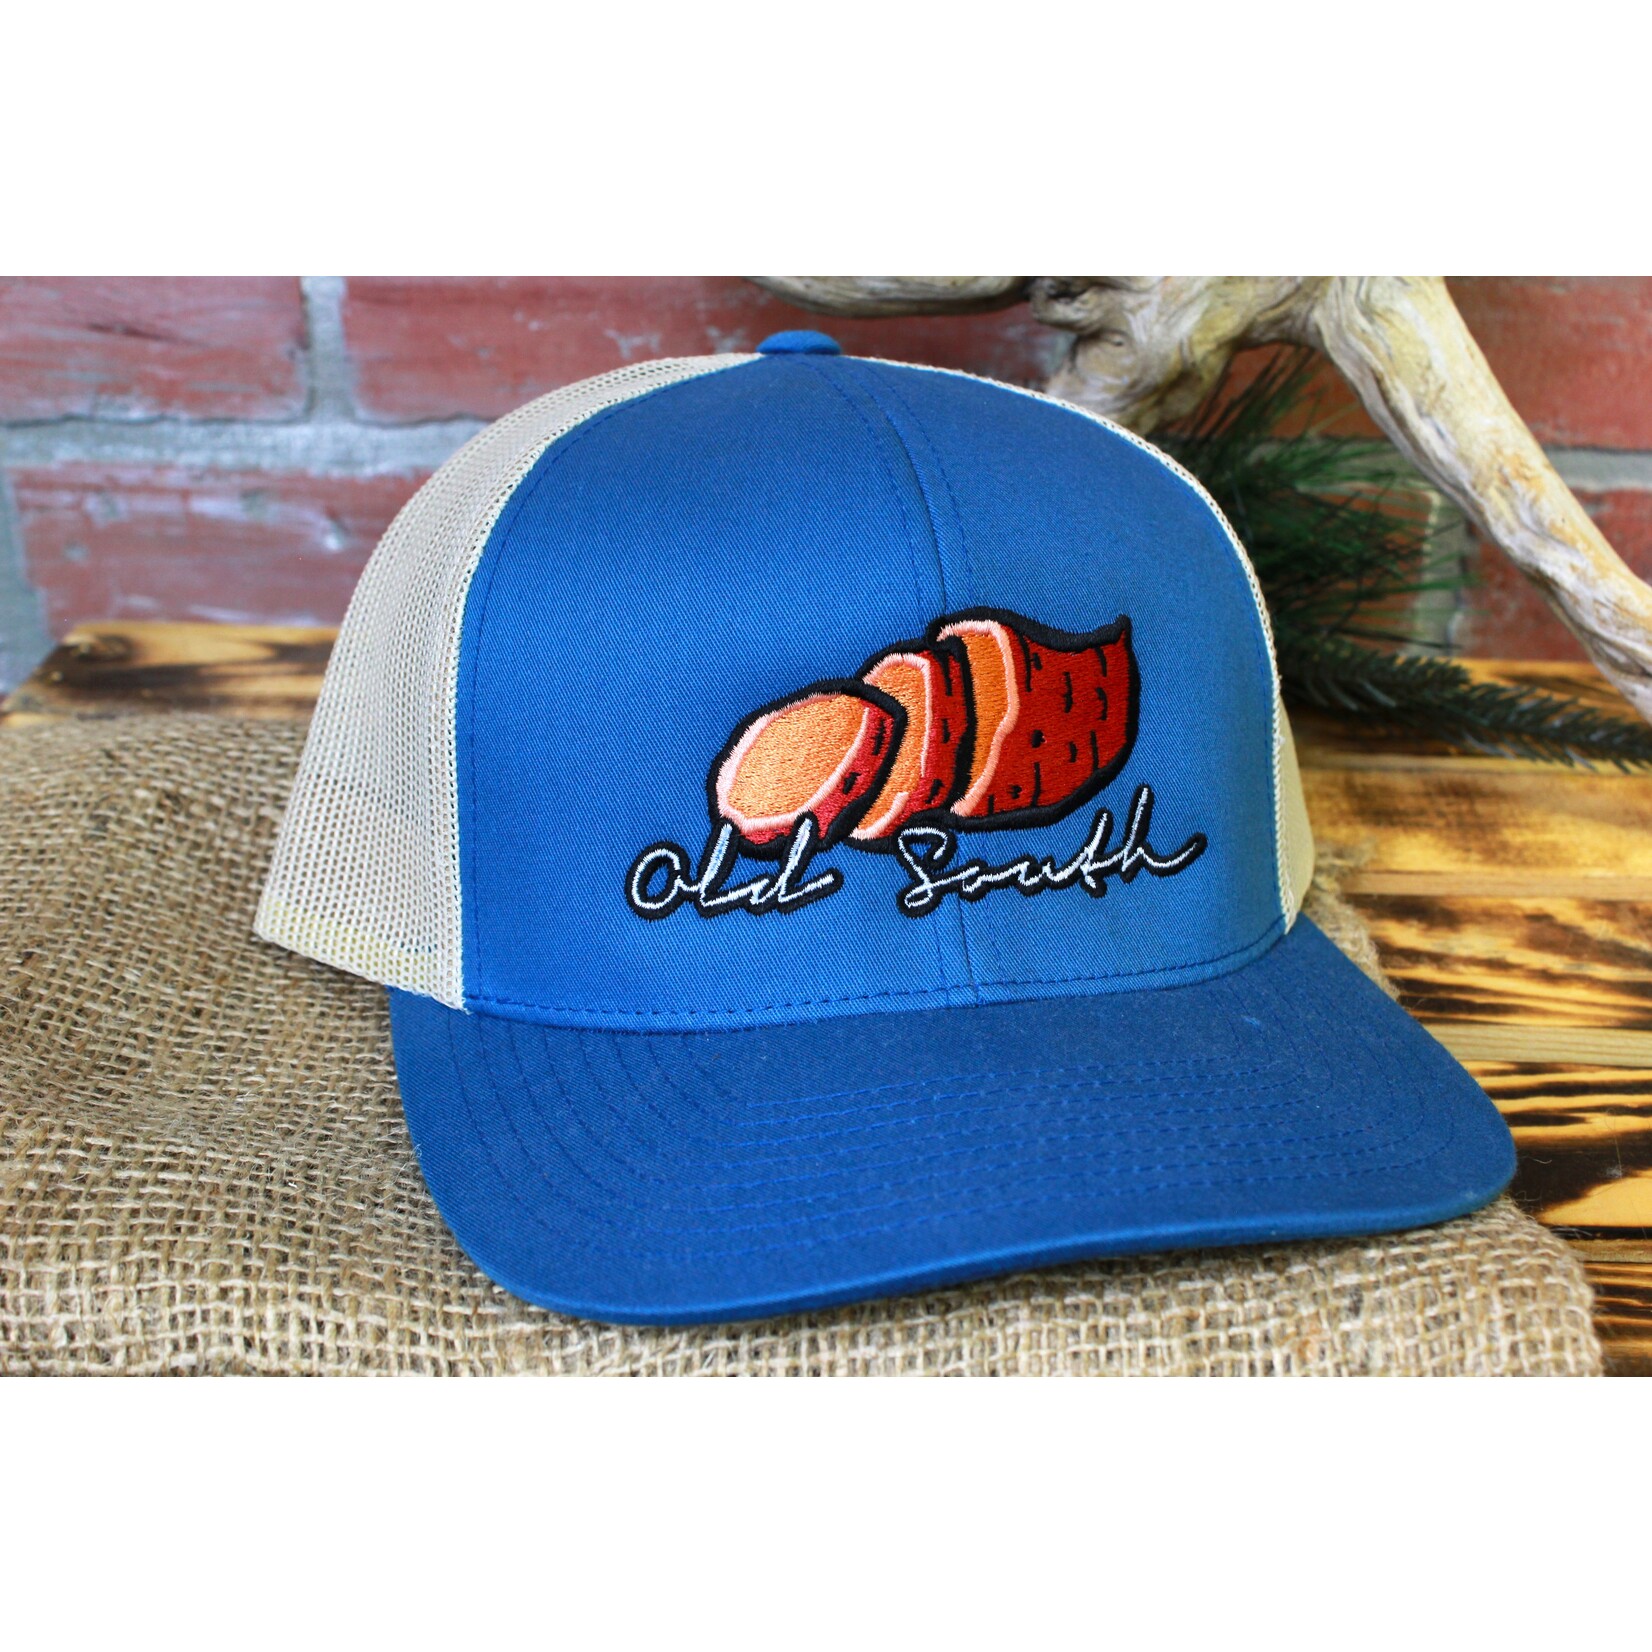 Old South Apparel Old South Apparel Sweet Potato Trucker Snapback Hat